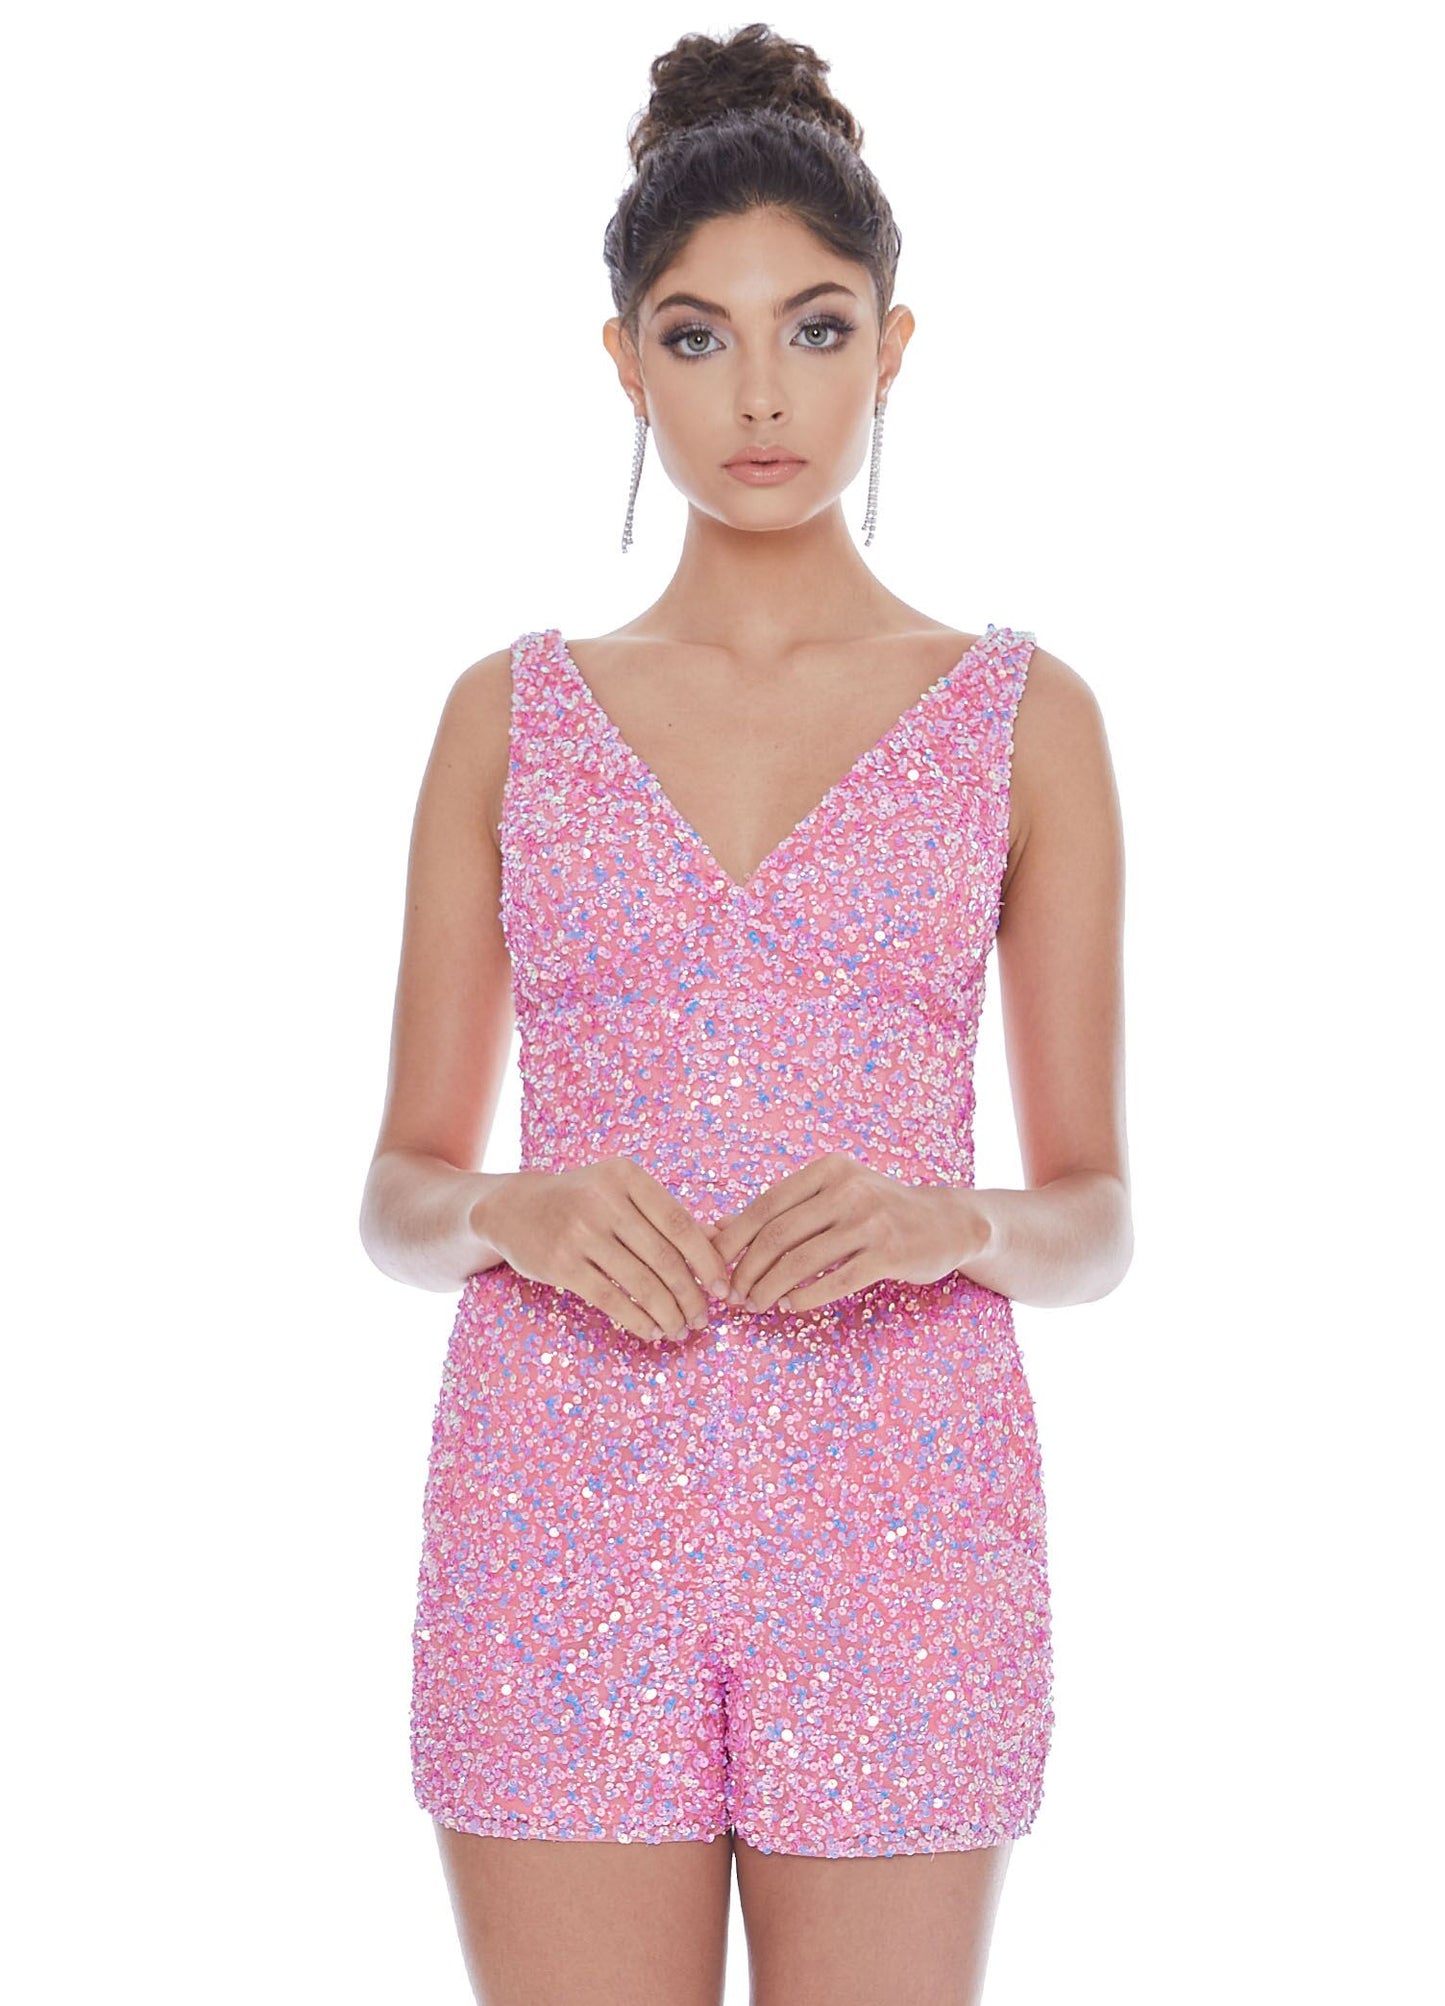 Ashley Lauren 4286 V neckline sequin romper for Prom, Pageant & almost any Formal & Semi Formal Event! Open V Back.  Available colors:  Aqua, Bubble Gum, Black, Red, Yellow  Available sizes:  0-16   Nothing is better than a romper! This fully beaded romper has a V-neckline and is complete with pockets. What more could you need?  Fully Beaded V-Neckline Pockets